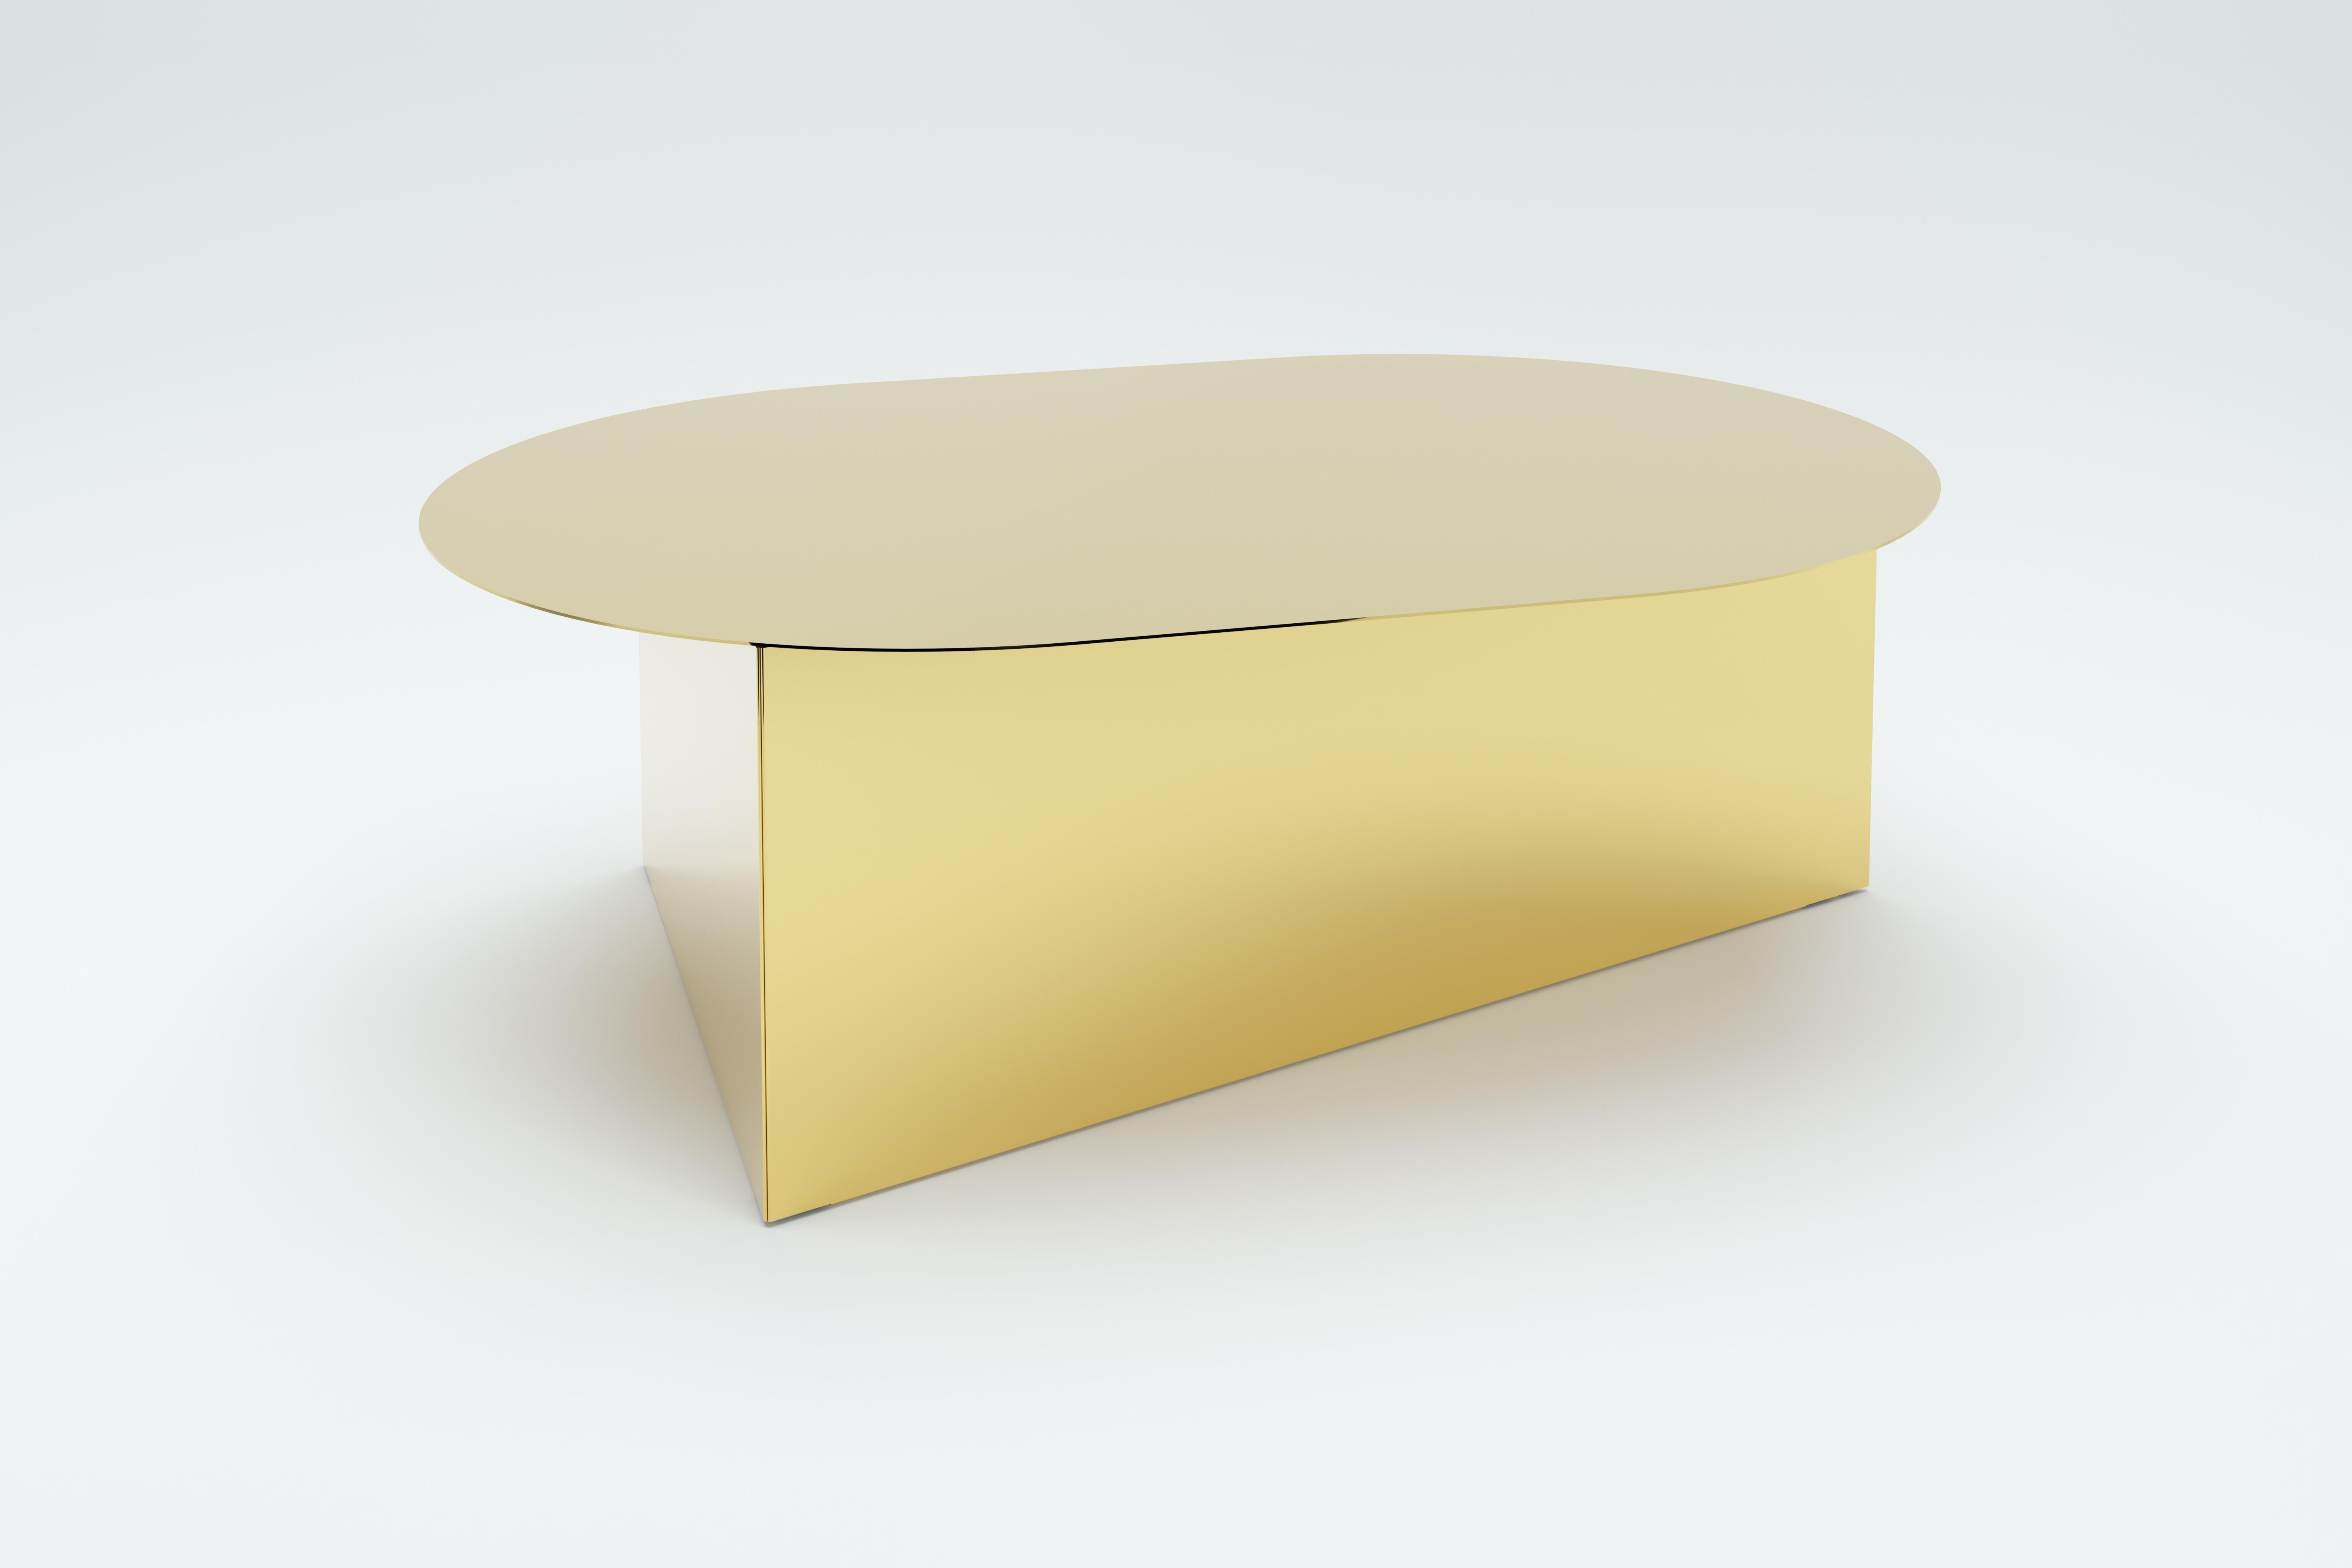 Mirror Oblong Prisma 105 coffee table by Sebastian Scherer.
Dimensions: D105 x W70x H35 cm.
Materials: Mirror.
Weight: 20.9 kg.
Also Available: Mirror Silver (stainless steel), mirror gold (brass coated stainless steel / mirror black (black